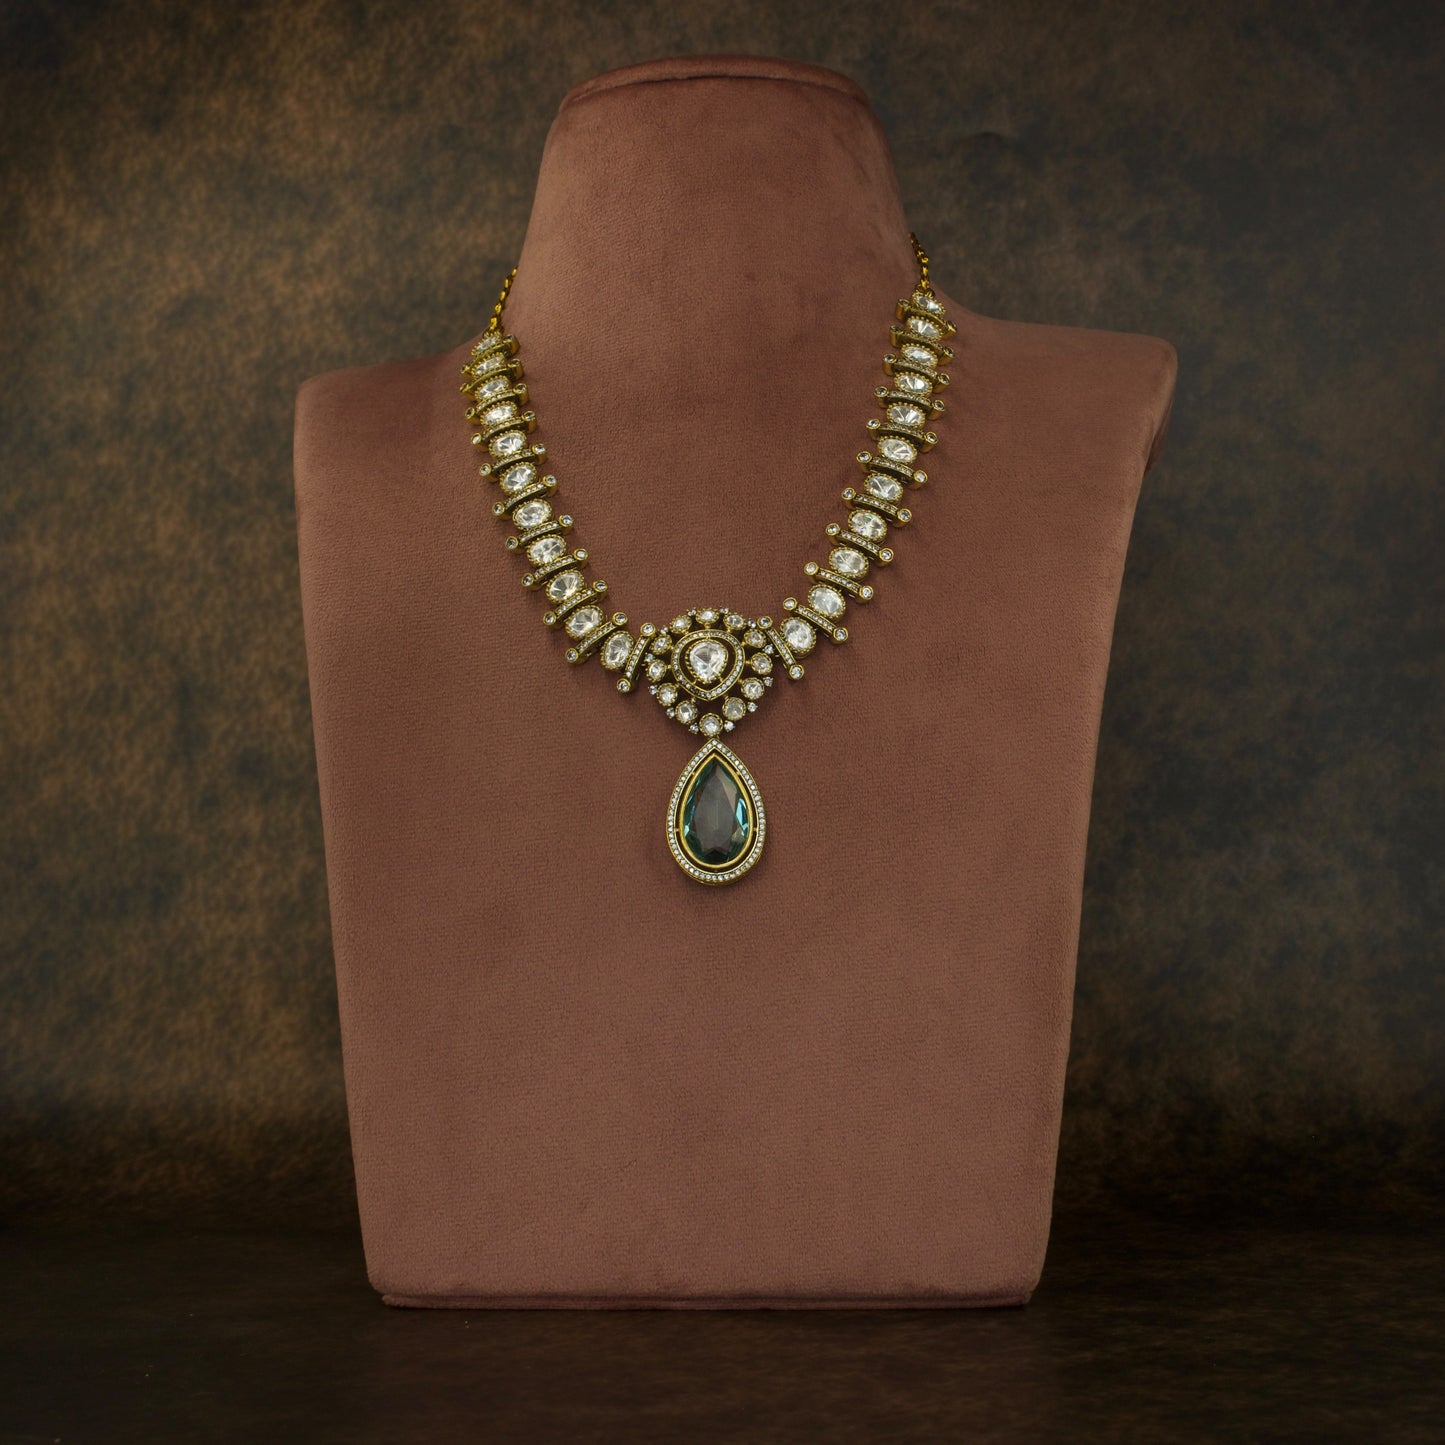 Modern Polki Necklace Set with Victorian Finish with High Quality Victorian finish. This product belongs to Victorian jewellery category